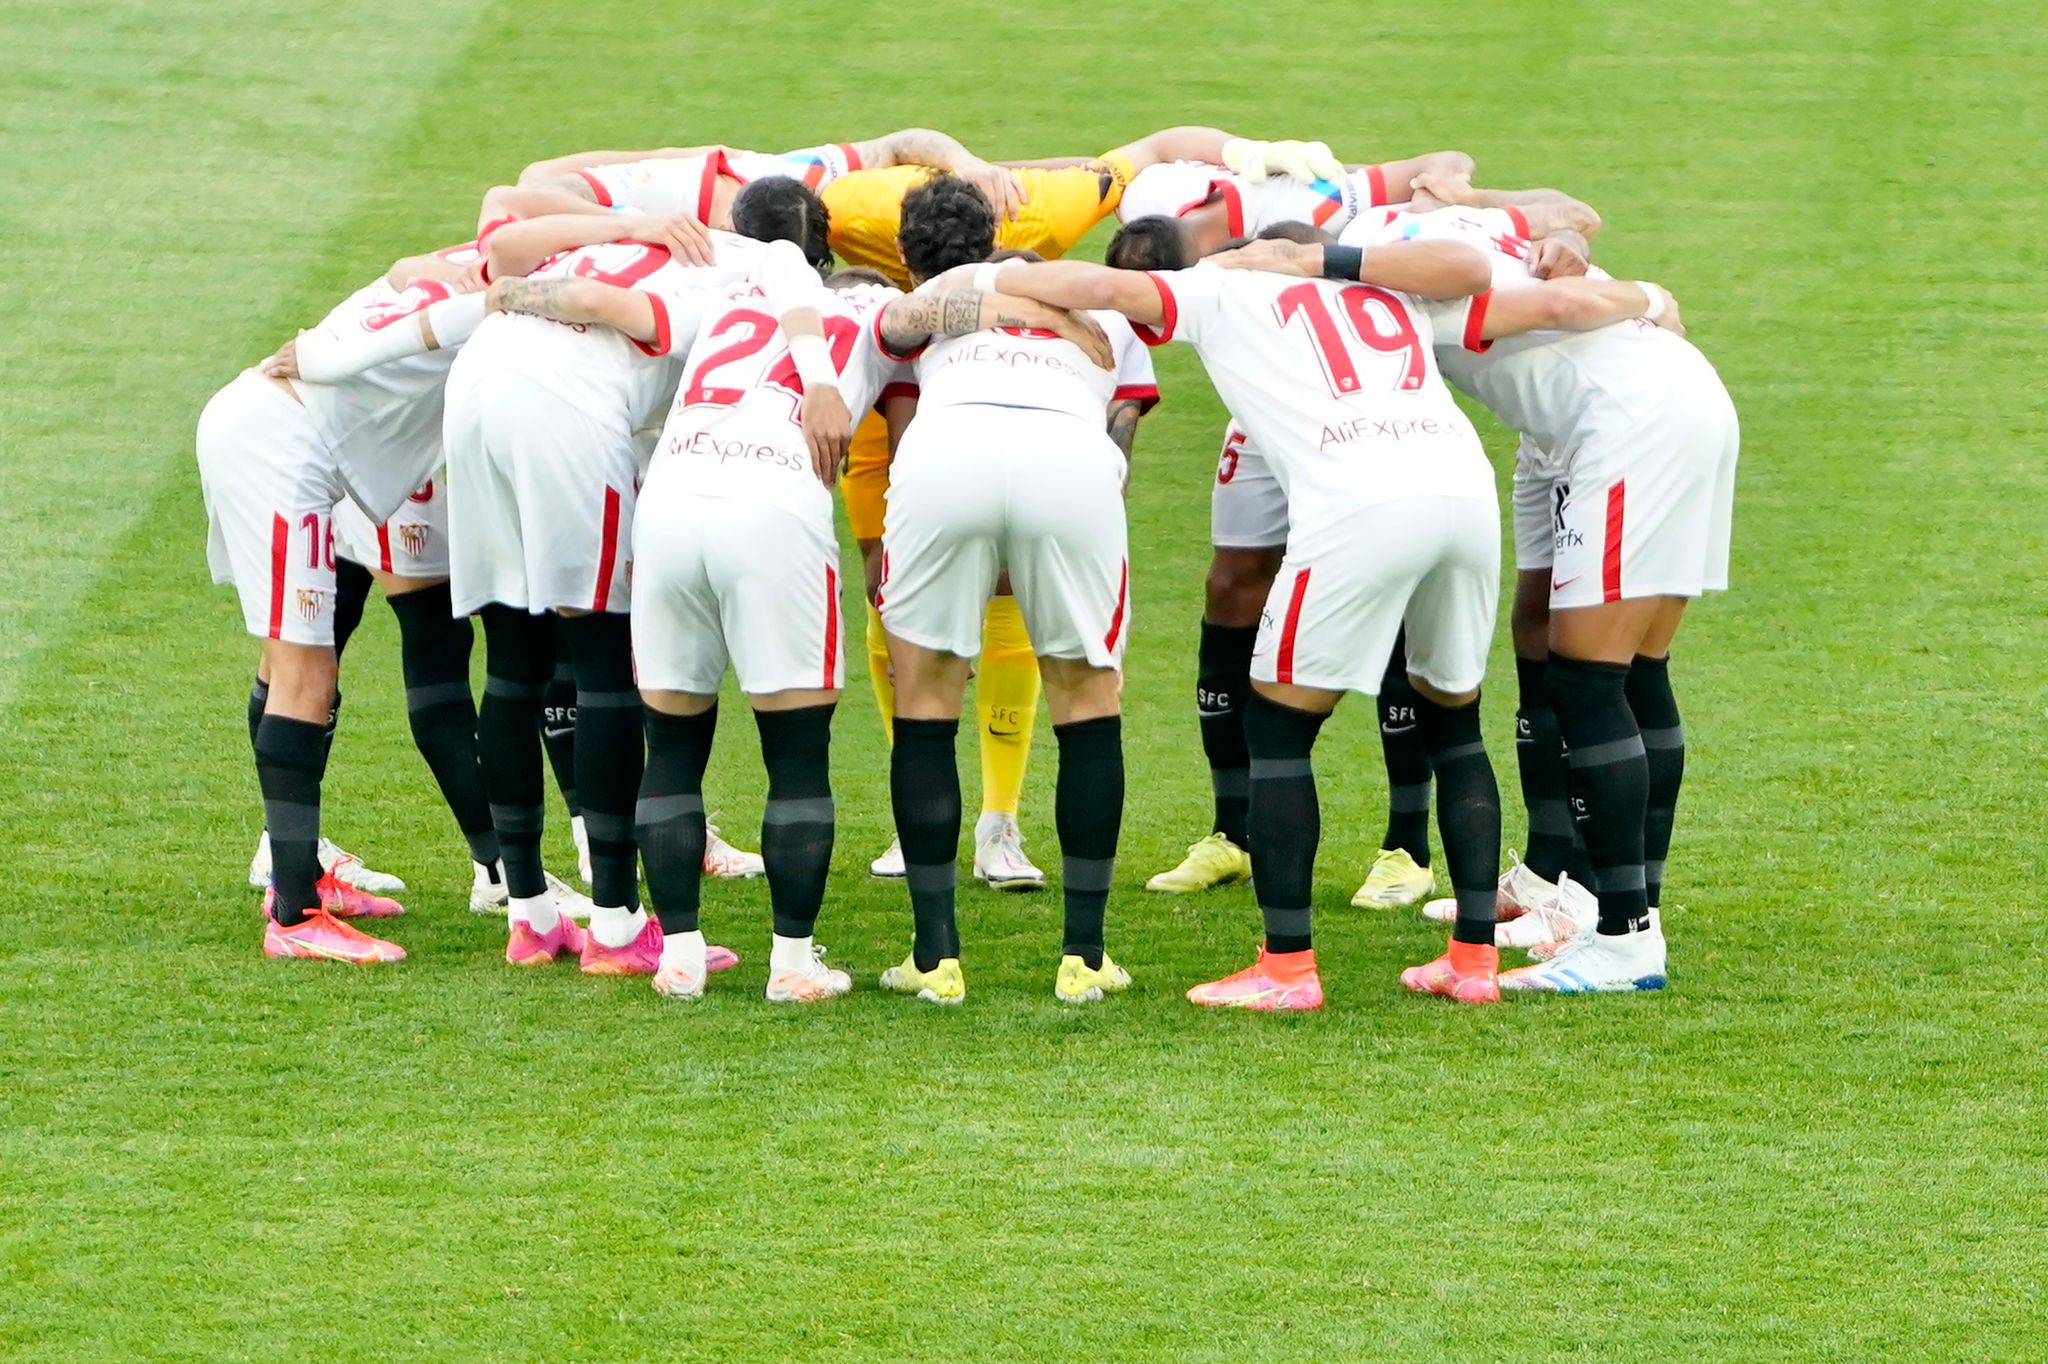 Sevilla FC come together before a game